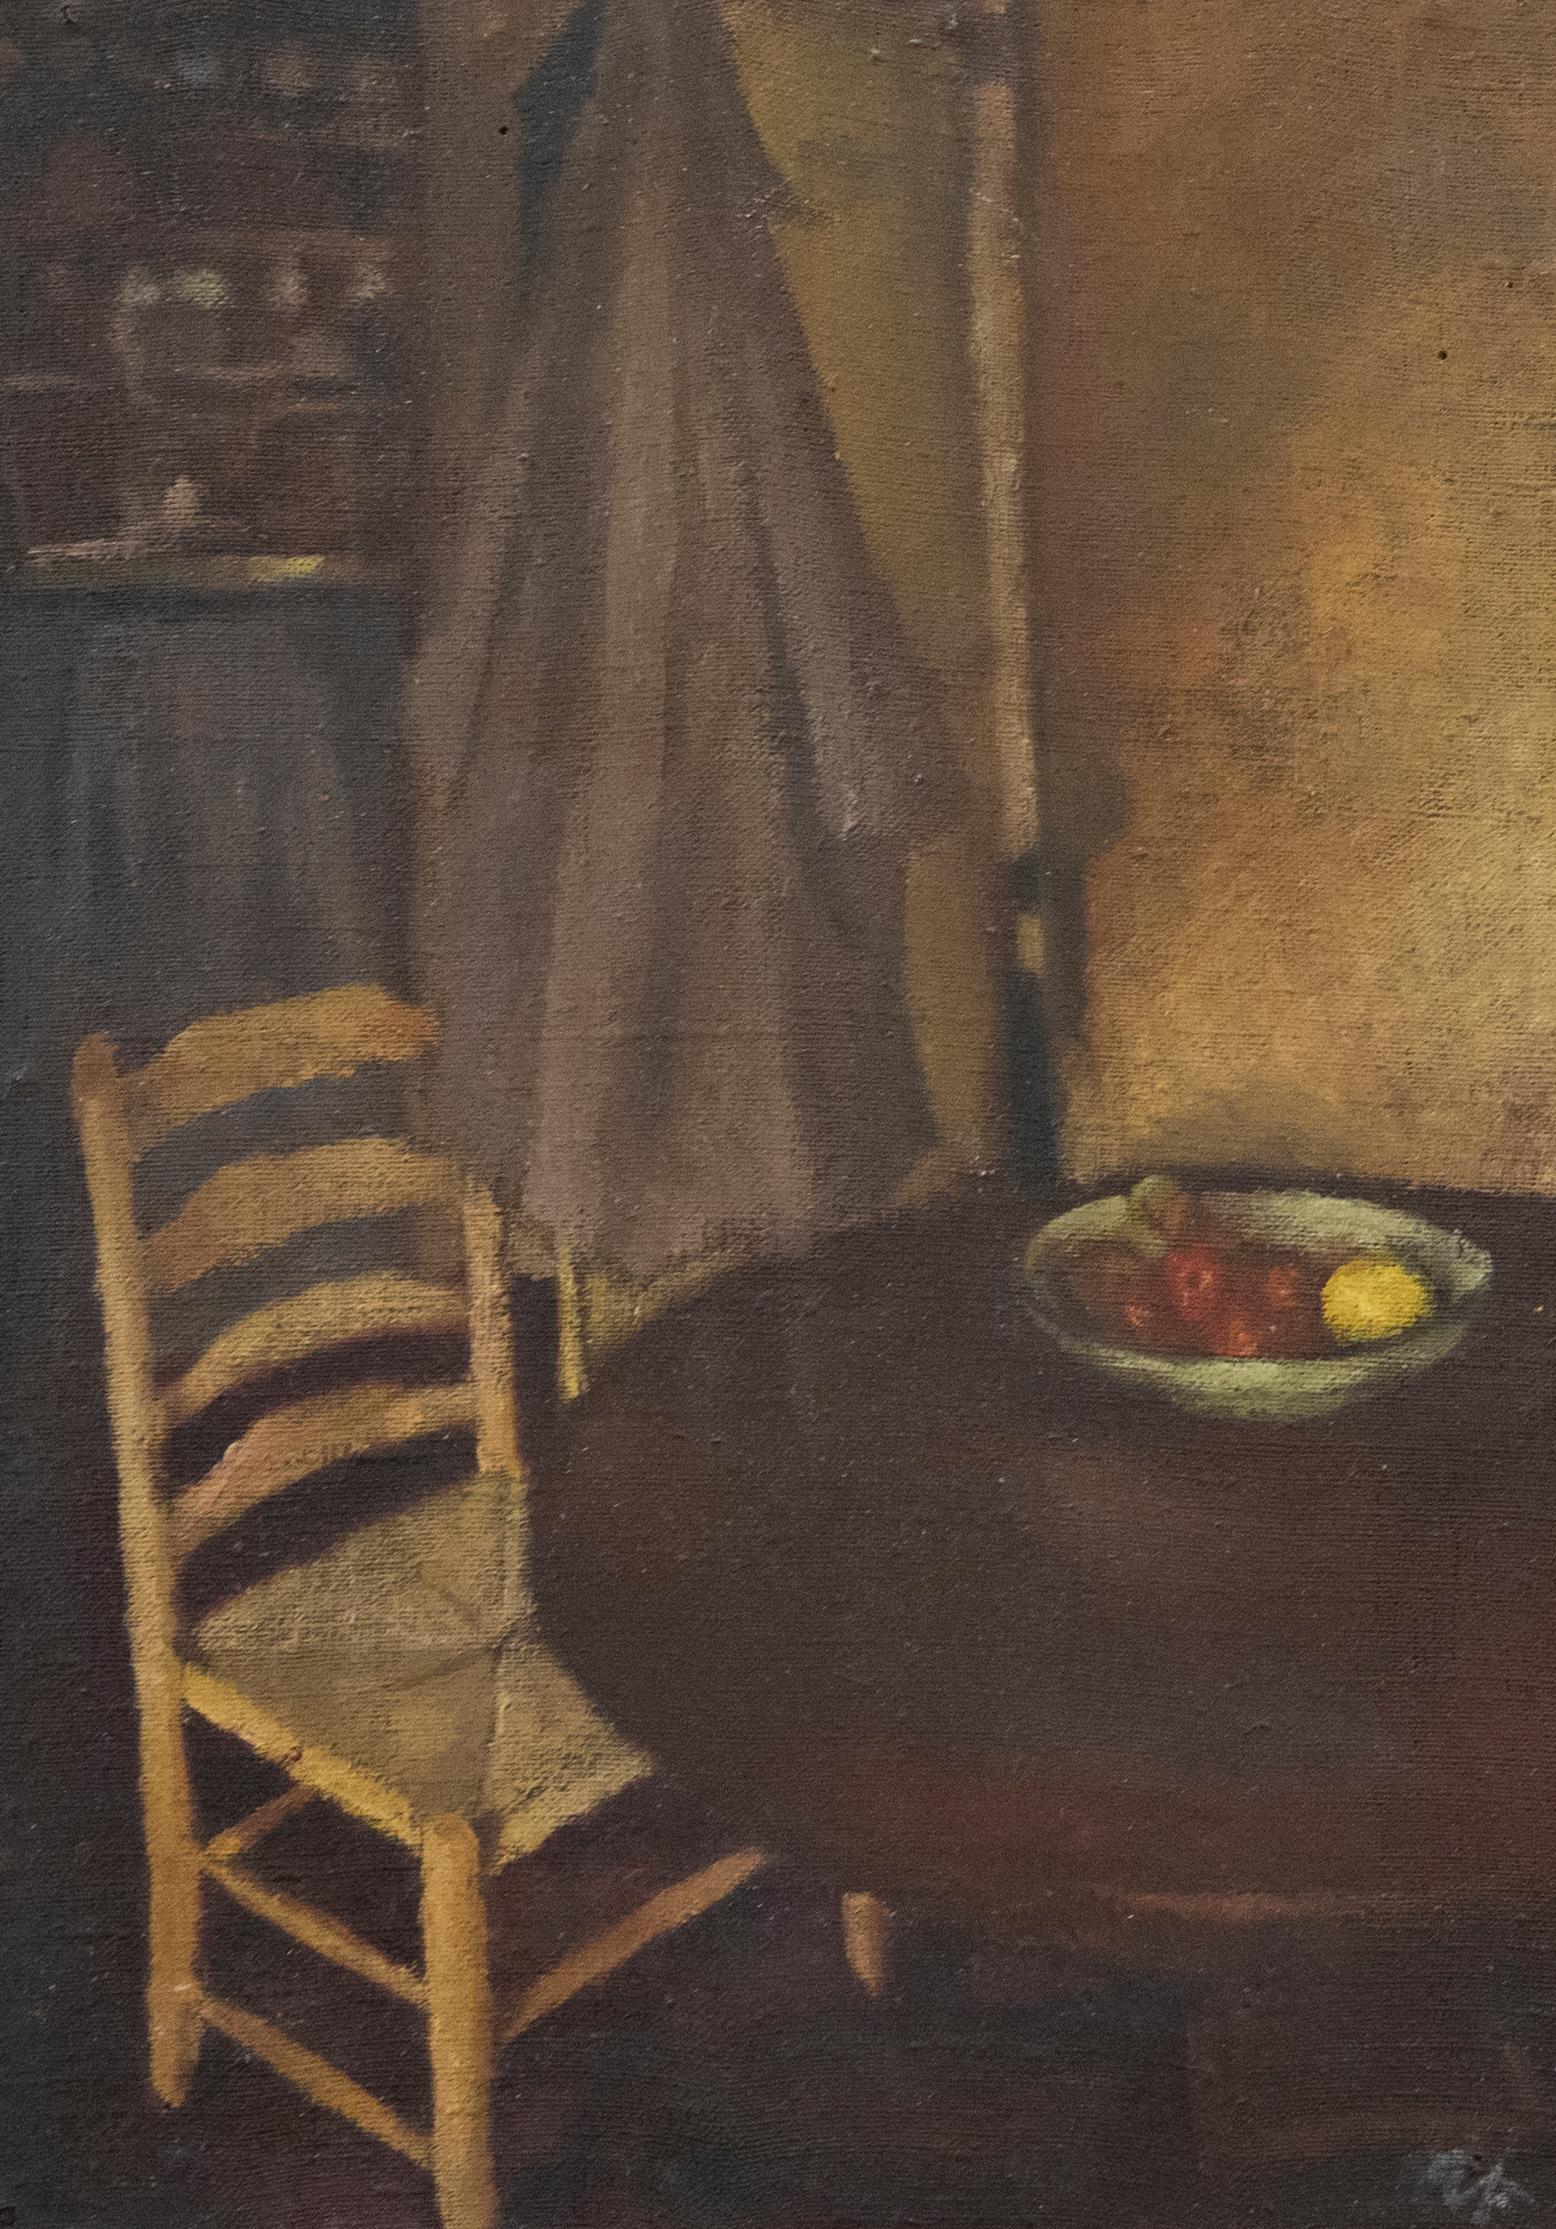 One of the earliest known works by the Welsh artist Ewart Johns. This simple yet stylish interior scene captures a humble wooden chair and table set with a large fruit bowl brimming with apples. A Welsh dresser can be seen in the background and the